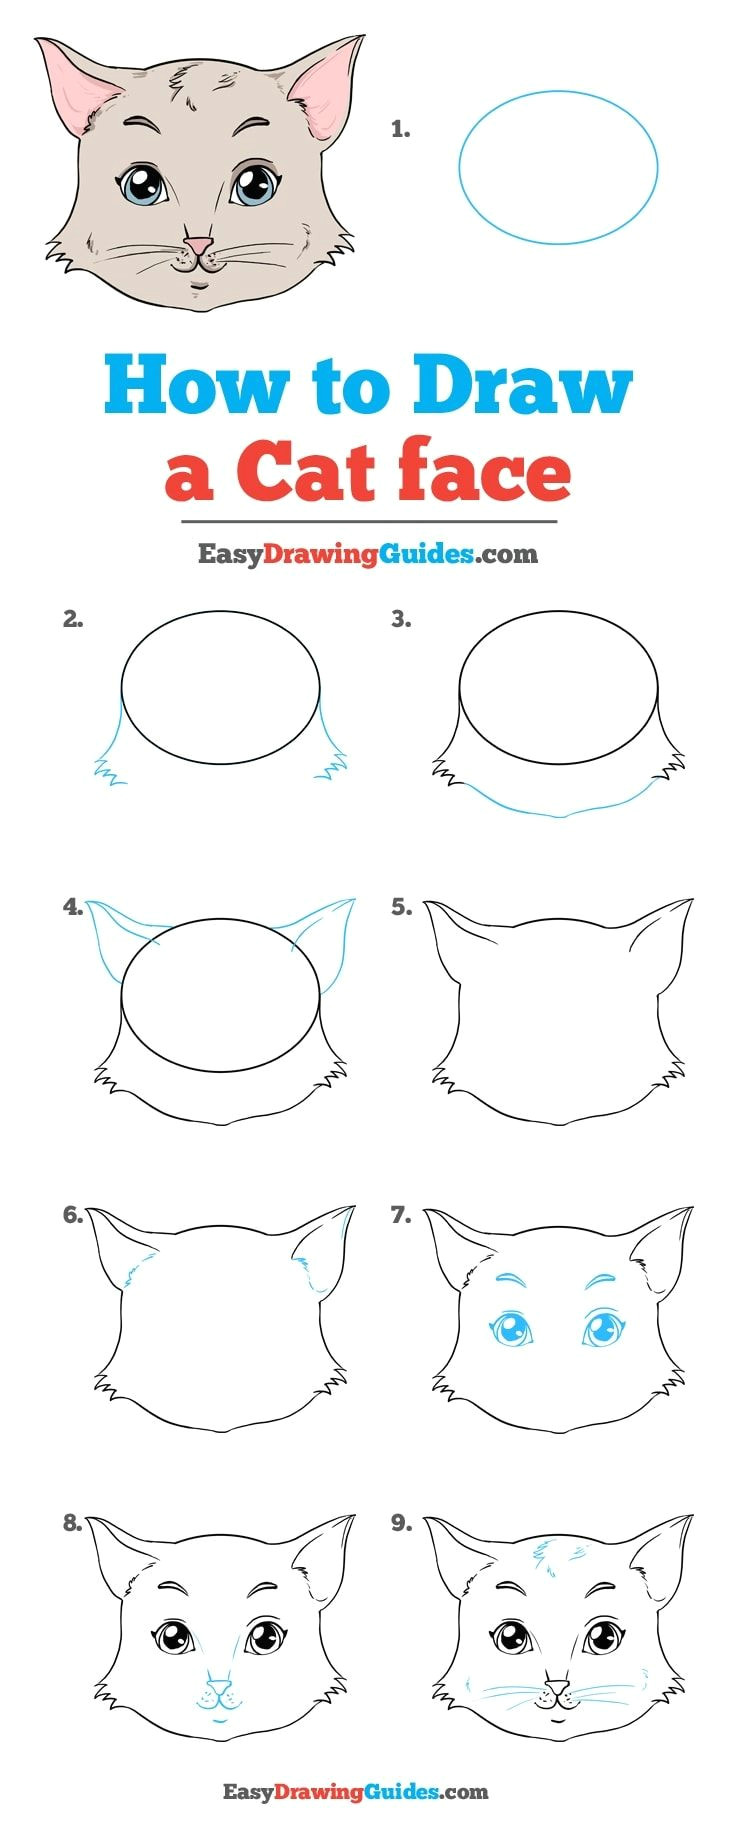 Beginner Step by Step Easy Drawings How to Draw A Cat Face Malen Gesichter Zeichnen